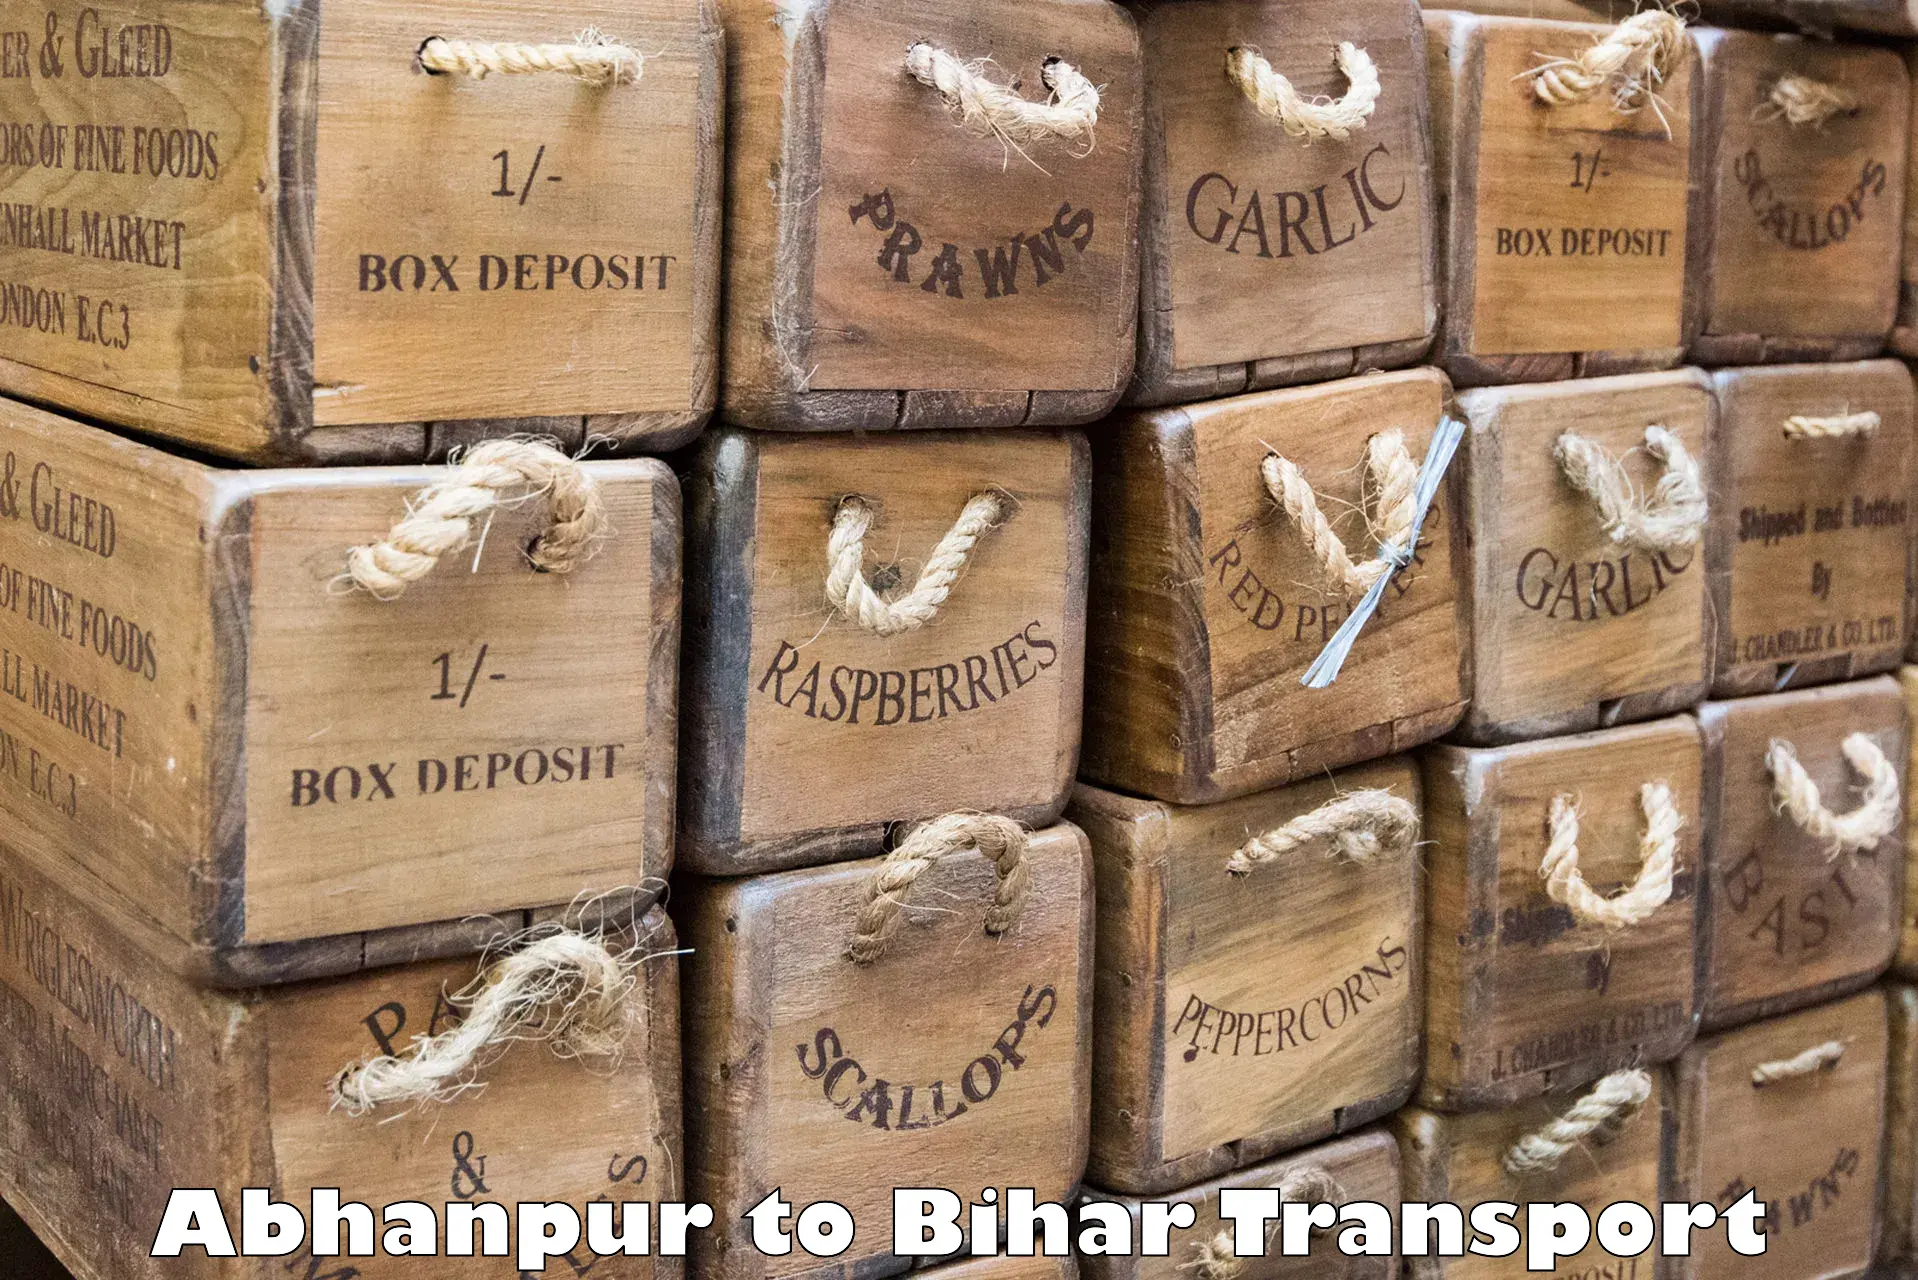 Lorry transport service in Abhanpur to Bhorey